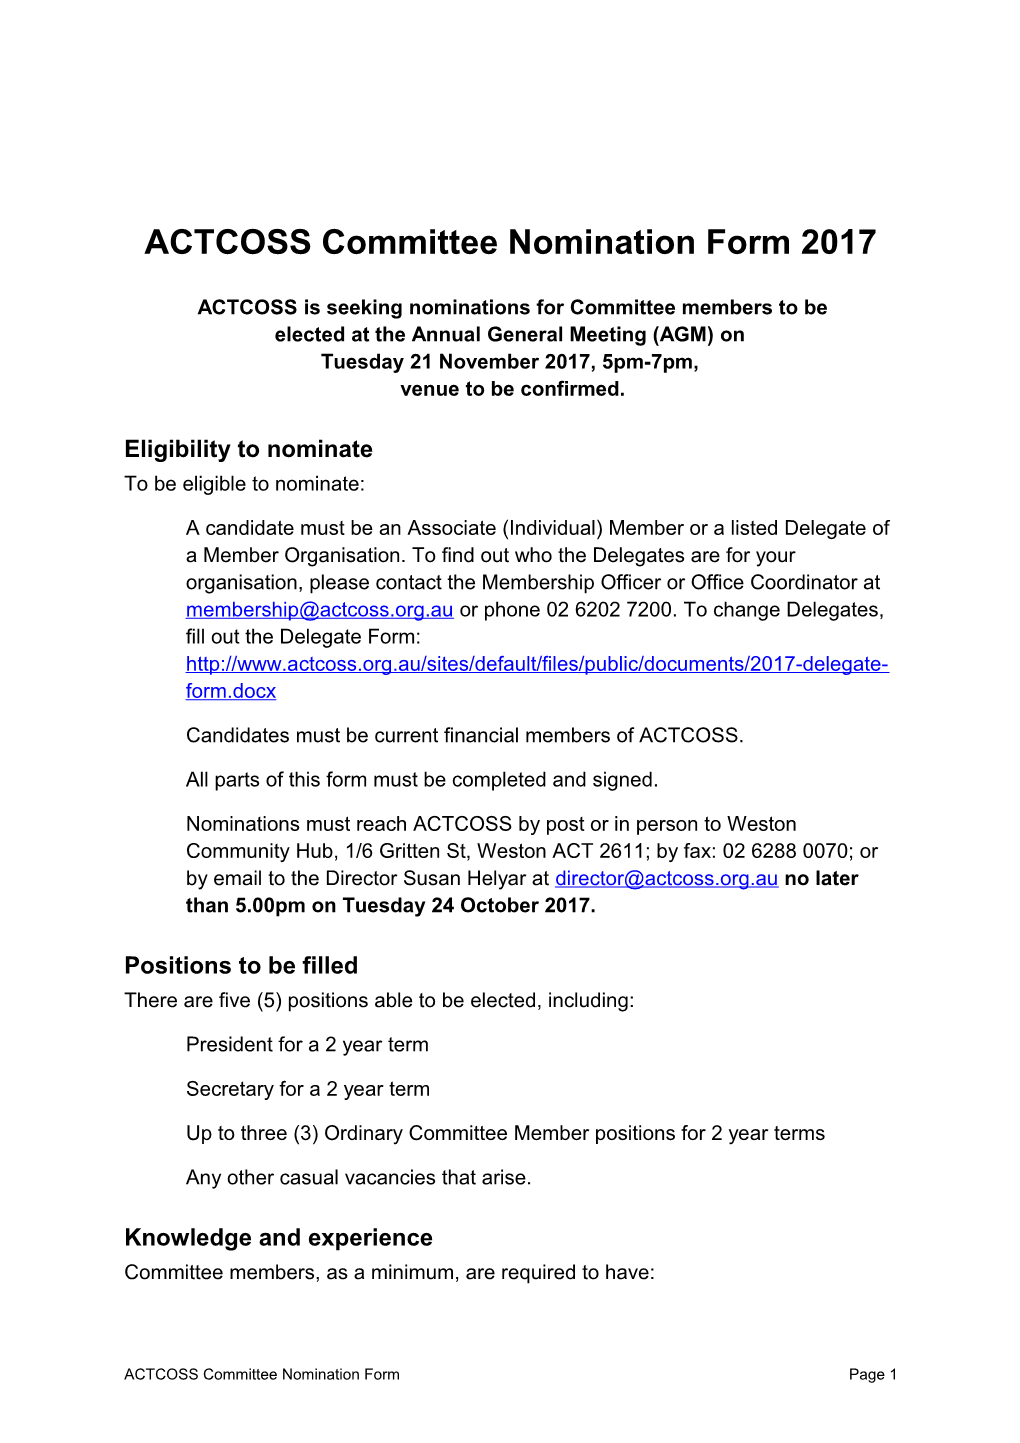 ACTCOSS Committee Nomination Form 2017